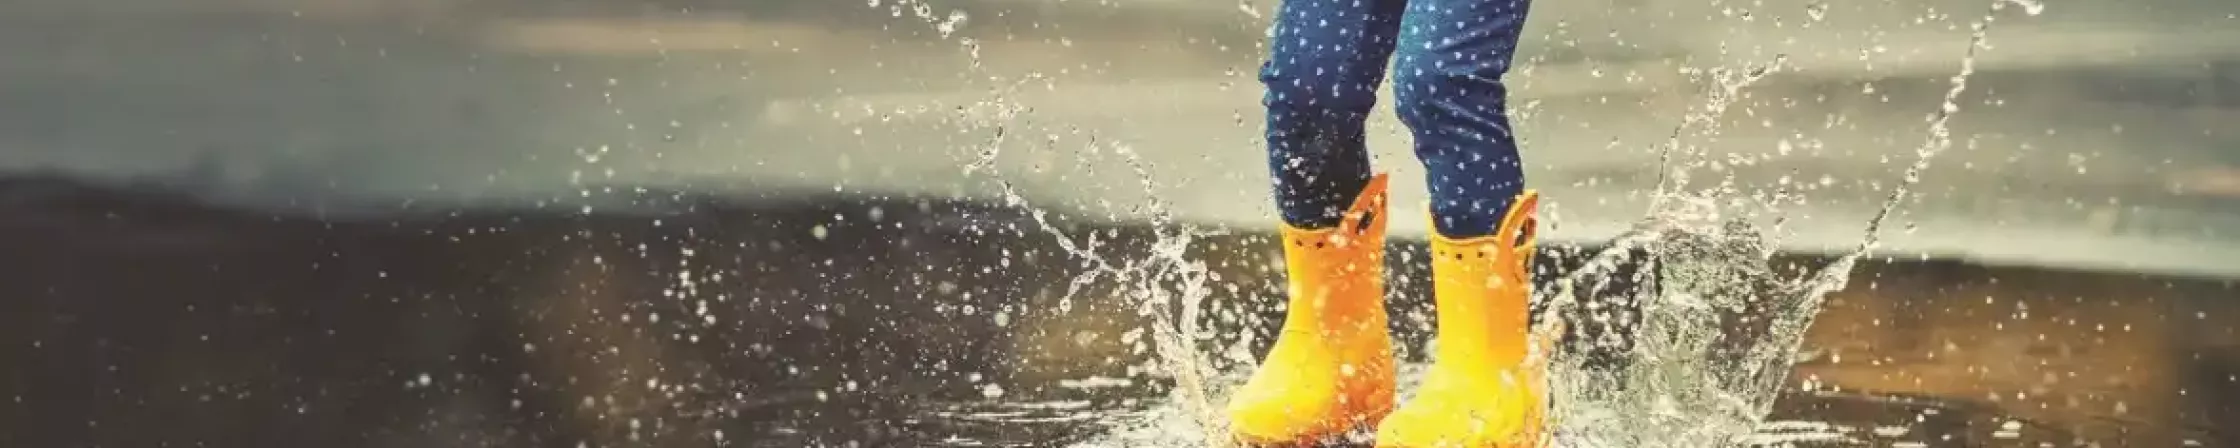 Girl with rubber boots in the rain jumps into a puddle.